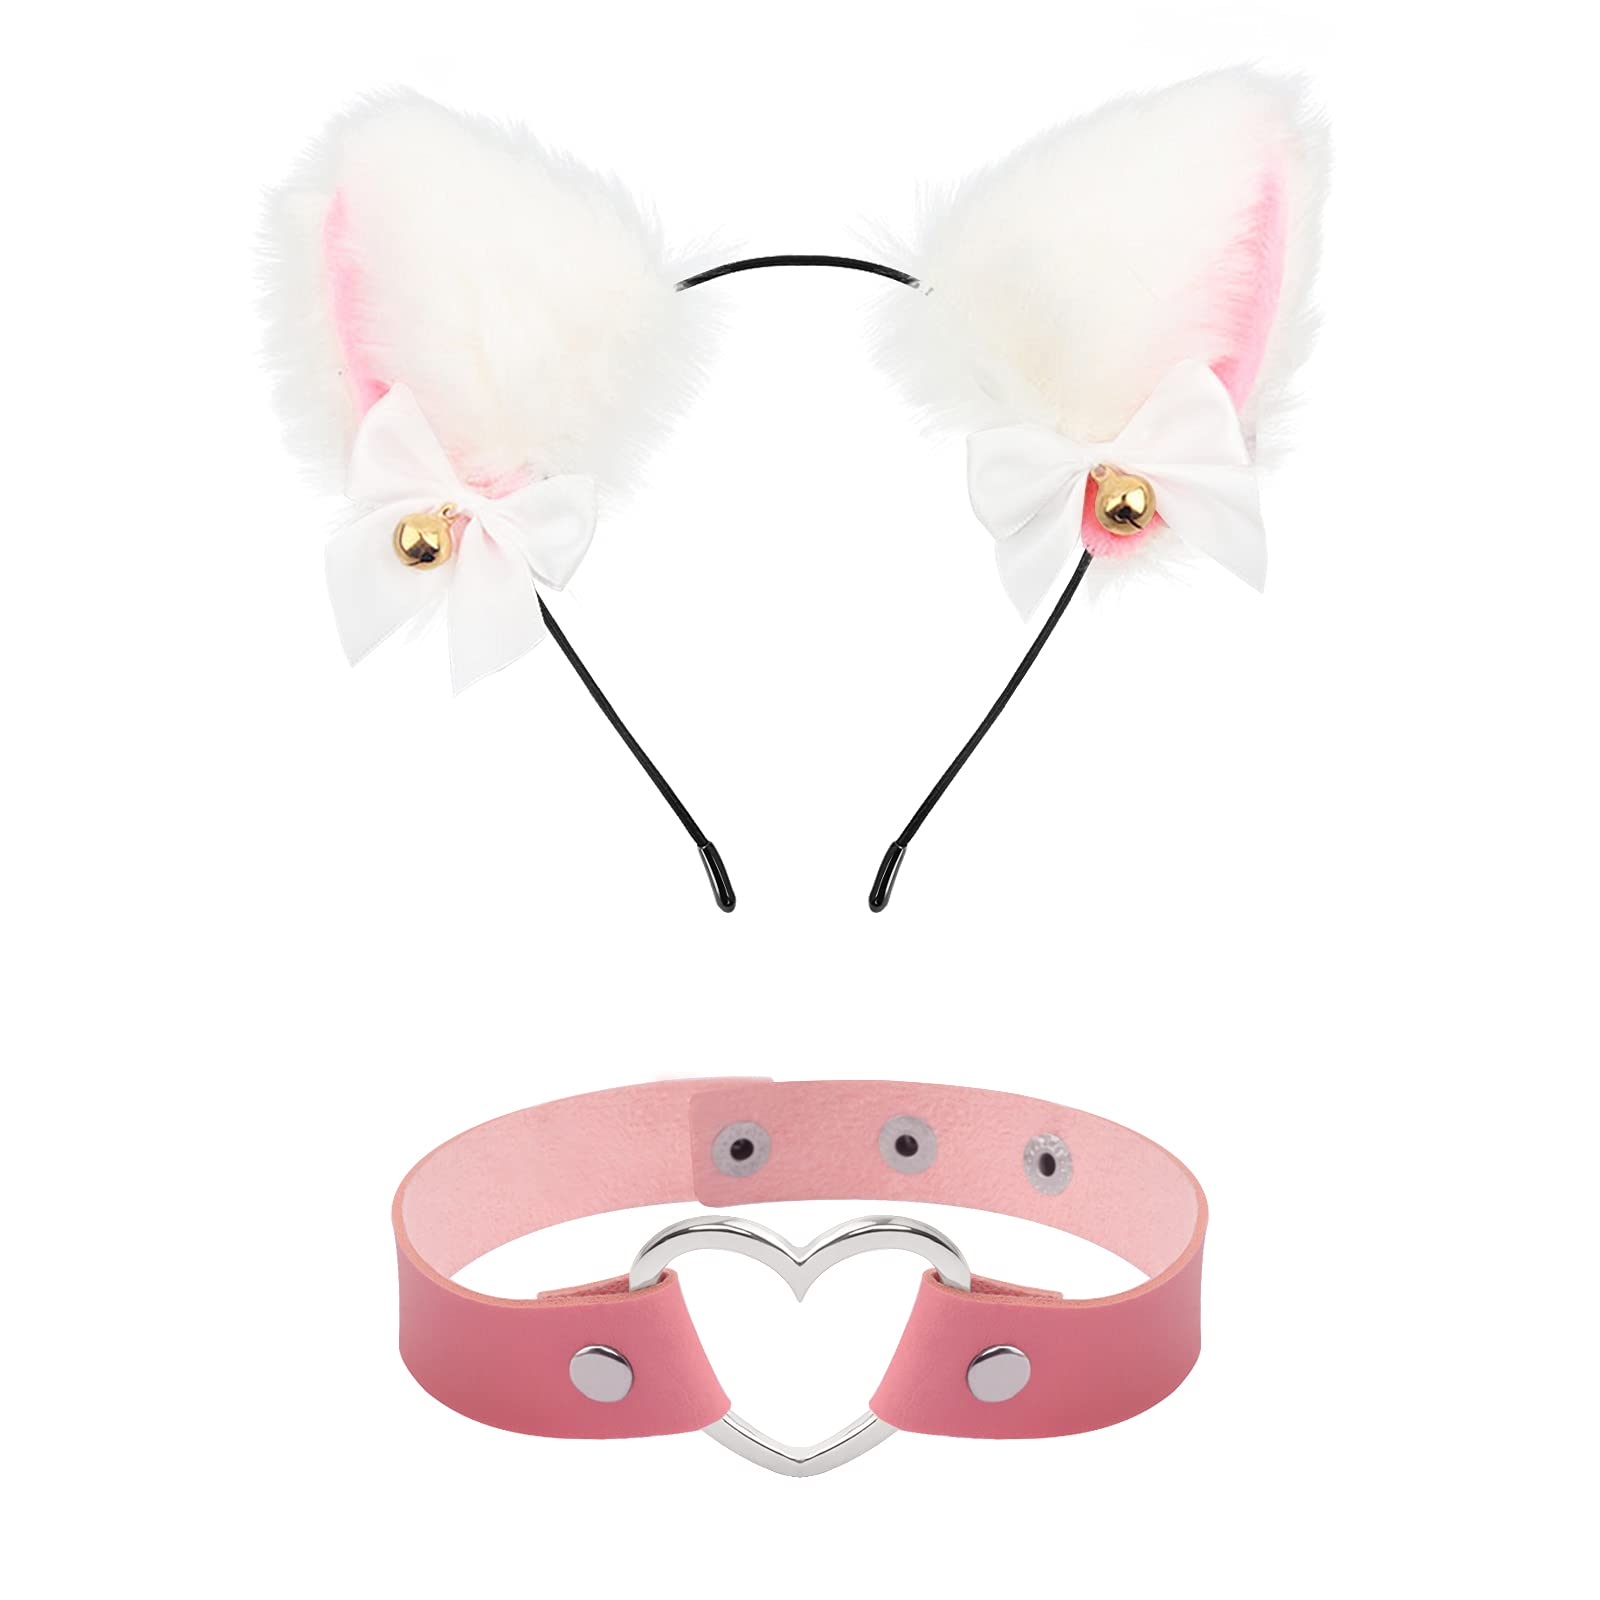 24 X  CAT EARS HEADBAND, CAT EARS HAIR HOOP AND PUNK FASHION CHOKER, CUTE CAT EARS HAIR BAND WITH BELL FOR WOMEN GIRLS CAT COSPLAY FANCY DRESS PARTY - TOTAL RRP £96: LOCATION - B RACK